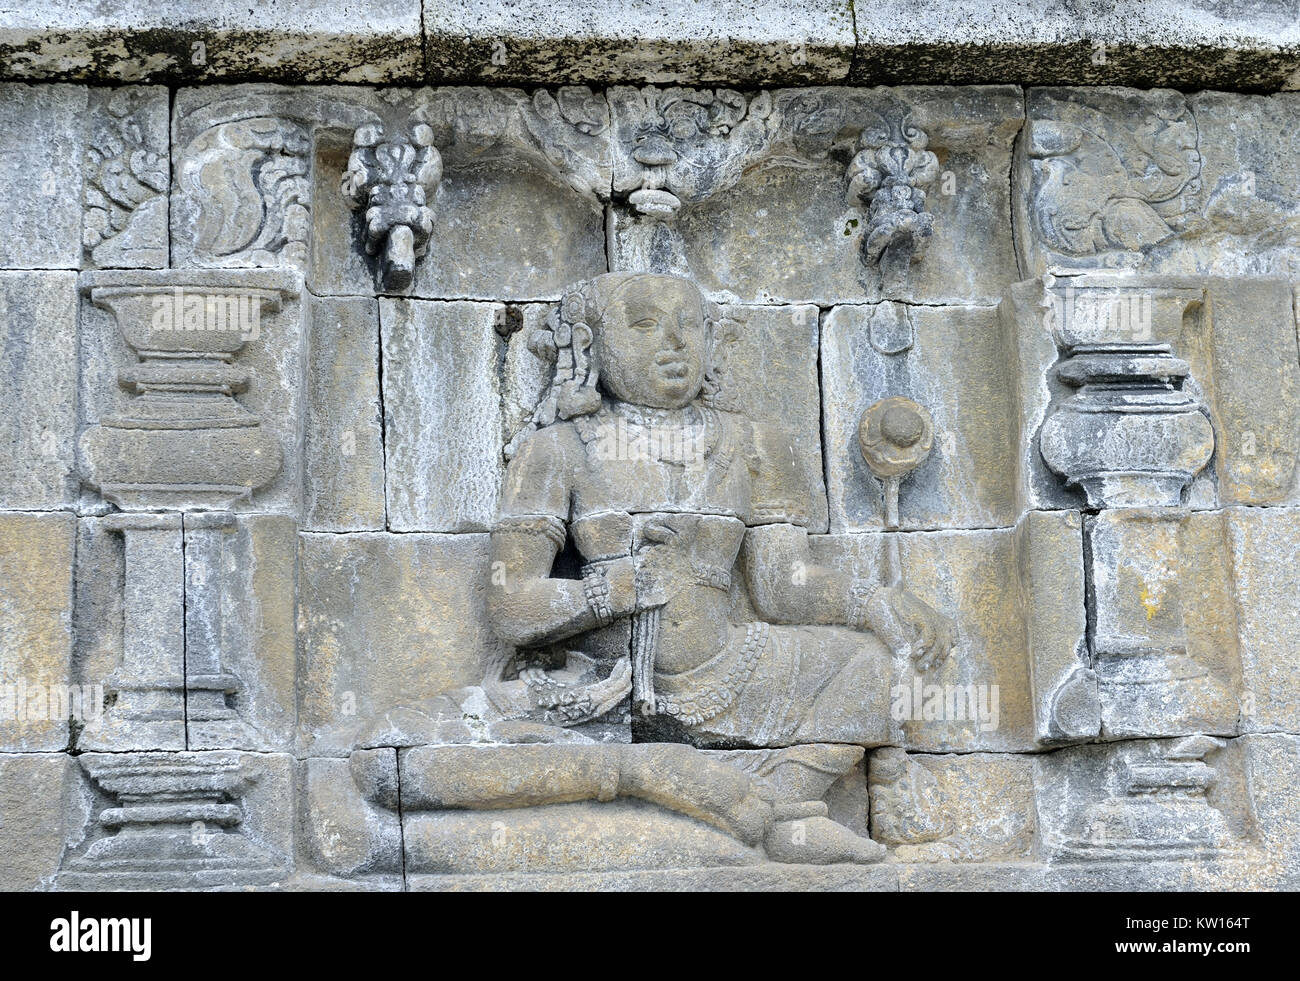 images hi-res - gallery photography stock relief Alamy and Borobudur